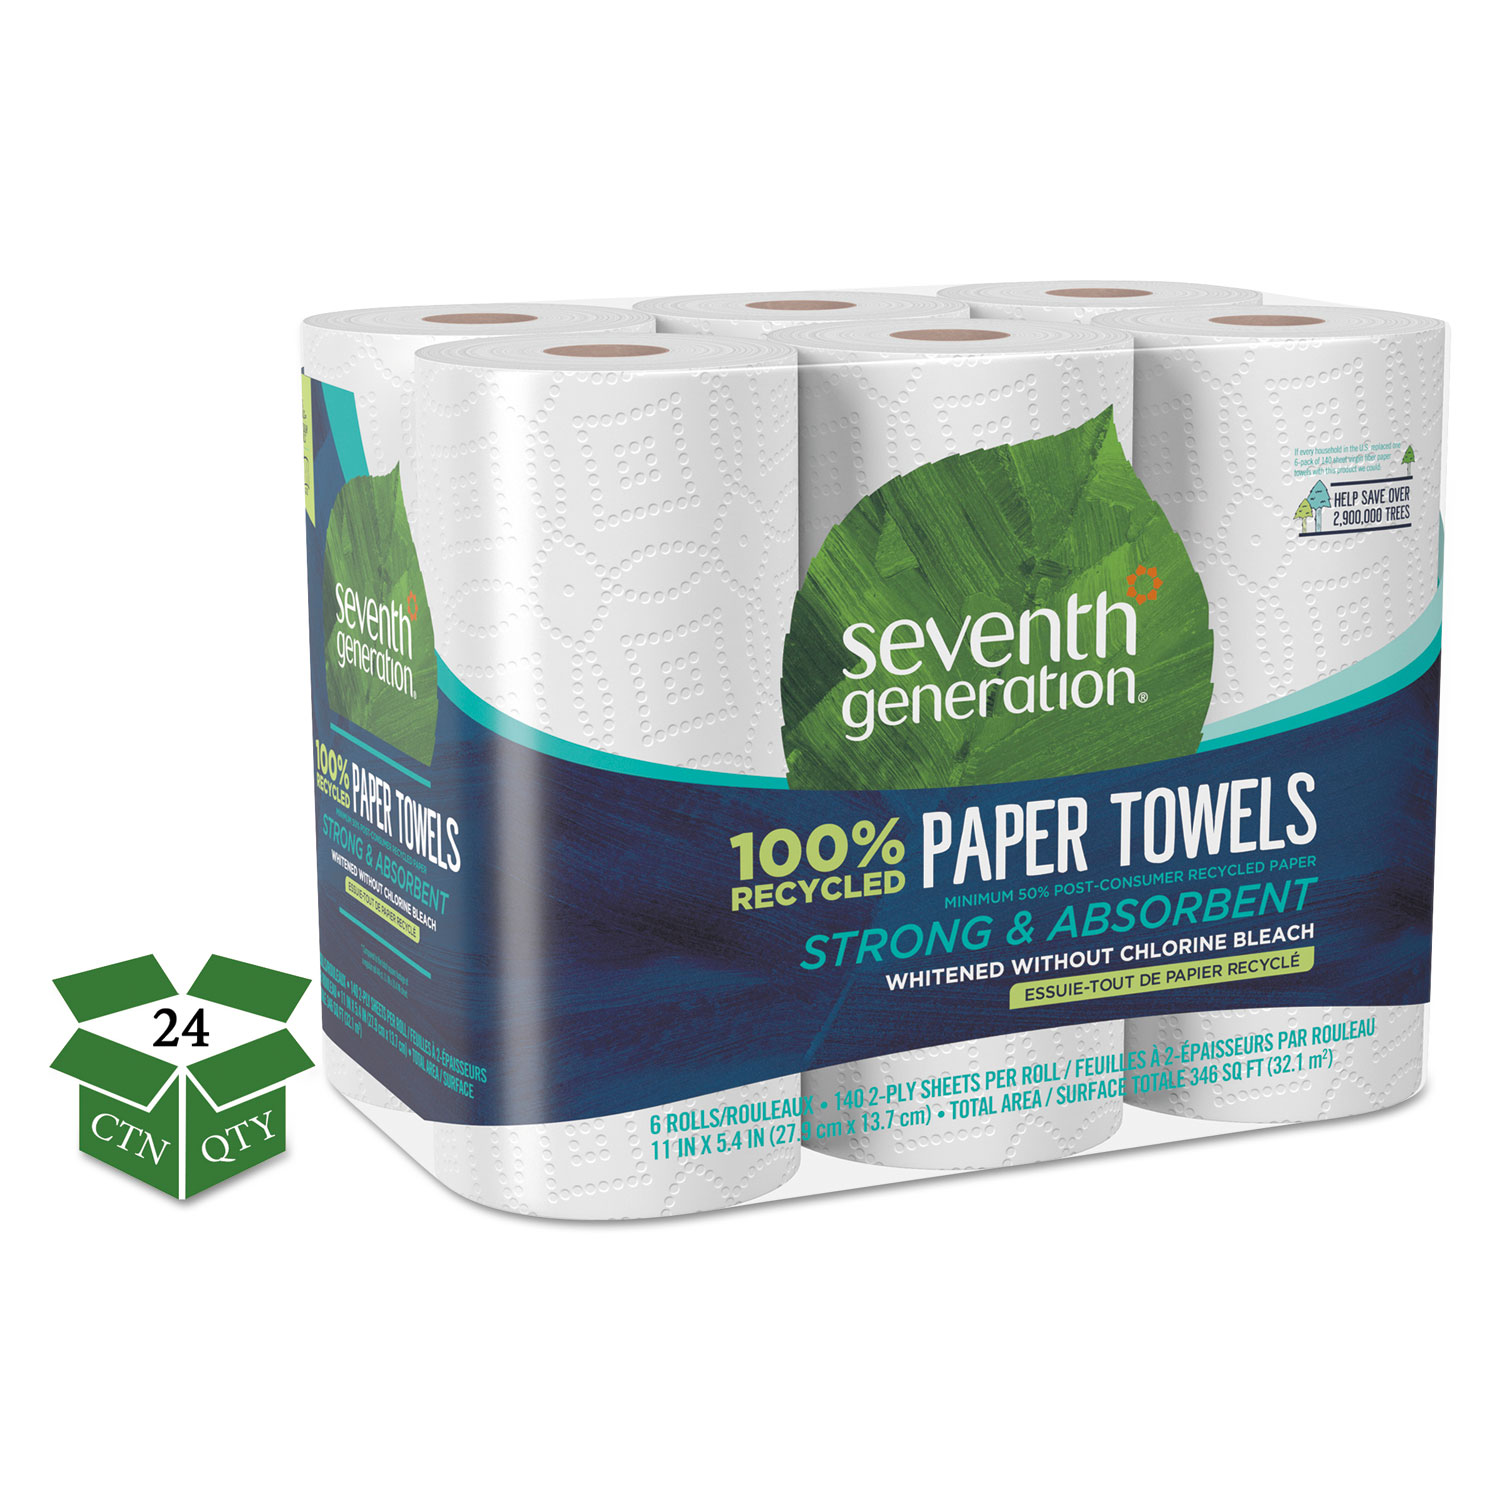  Seventh Generation SEV 13731 100% Recycled Paper Towel Rolls, 2-Ply, 11 x 5.4 Sheets, 140 Sheets/RL, 24 RL/CT (SEV13731CT) 